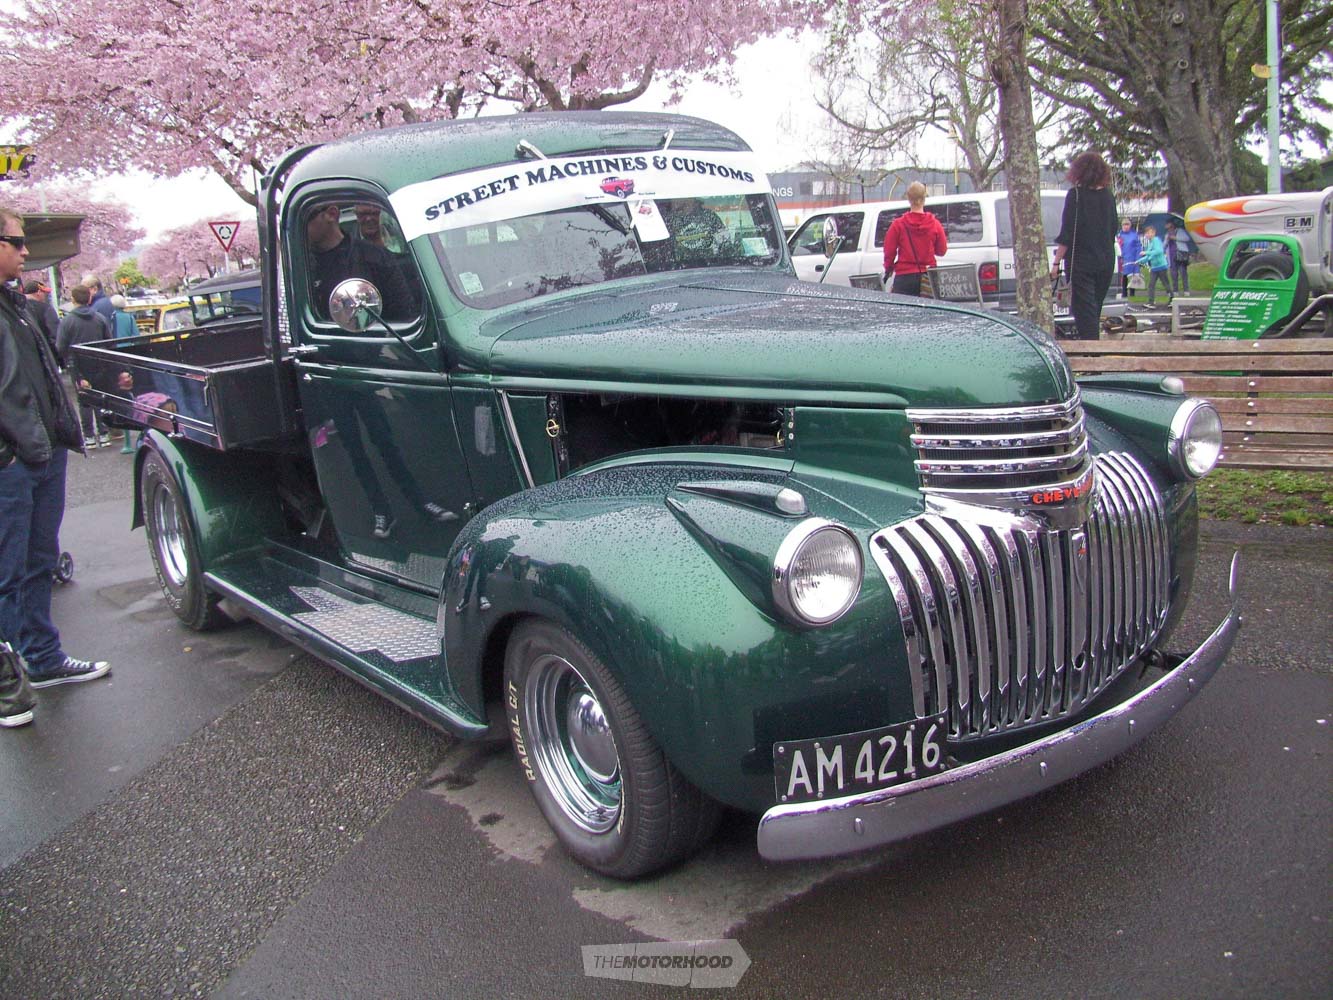 Colin Fitch from SM&Cs also had his 1946 Chev Thriftmaster pickup on display.It runs a 454 Chev V8 in it.jpg